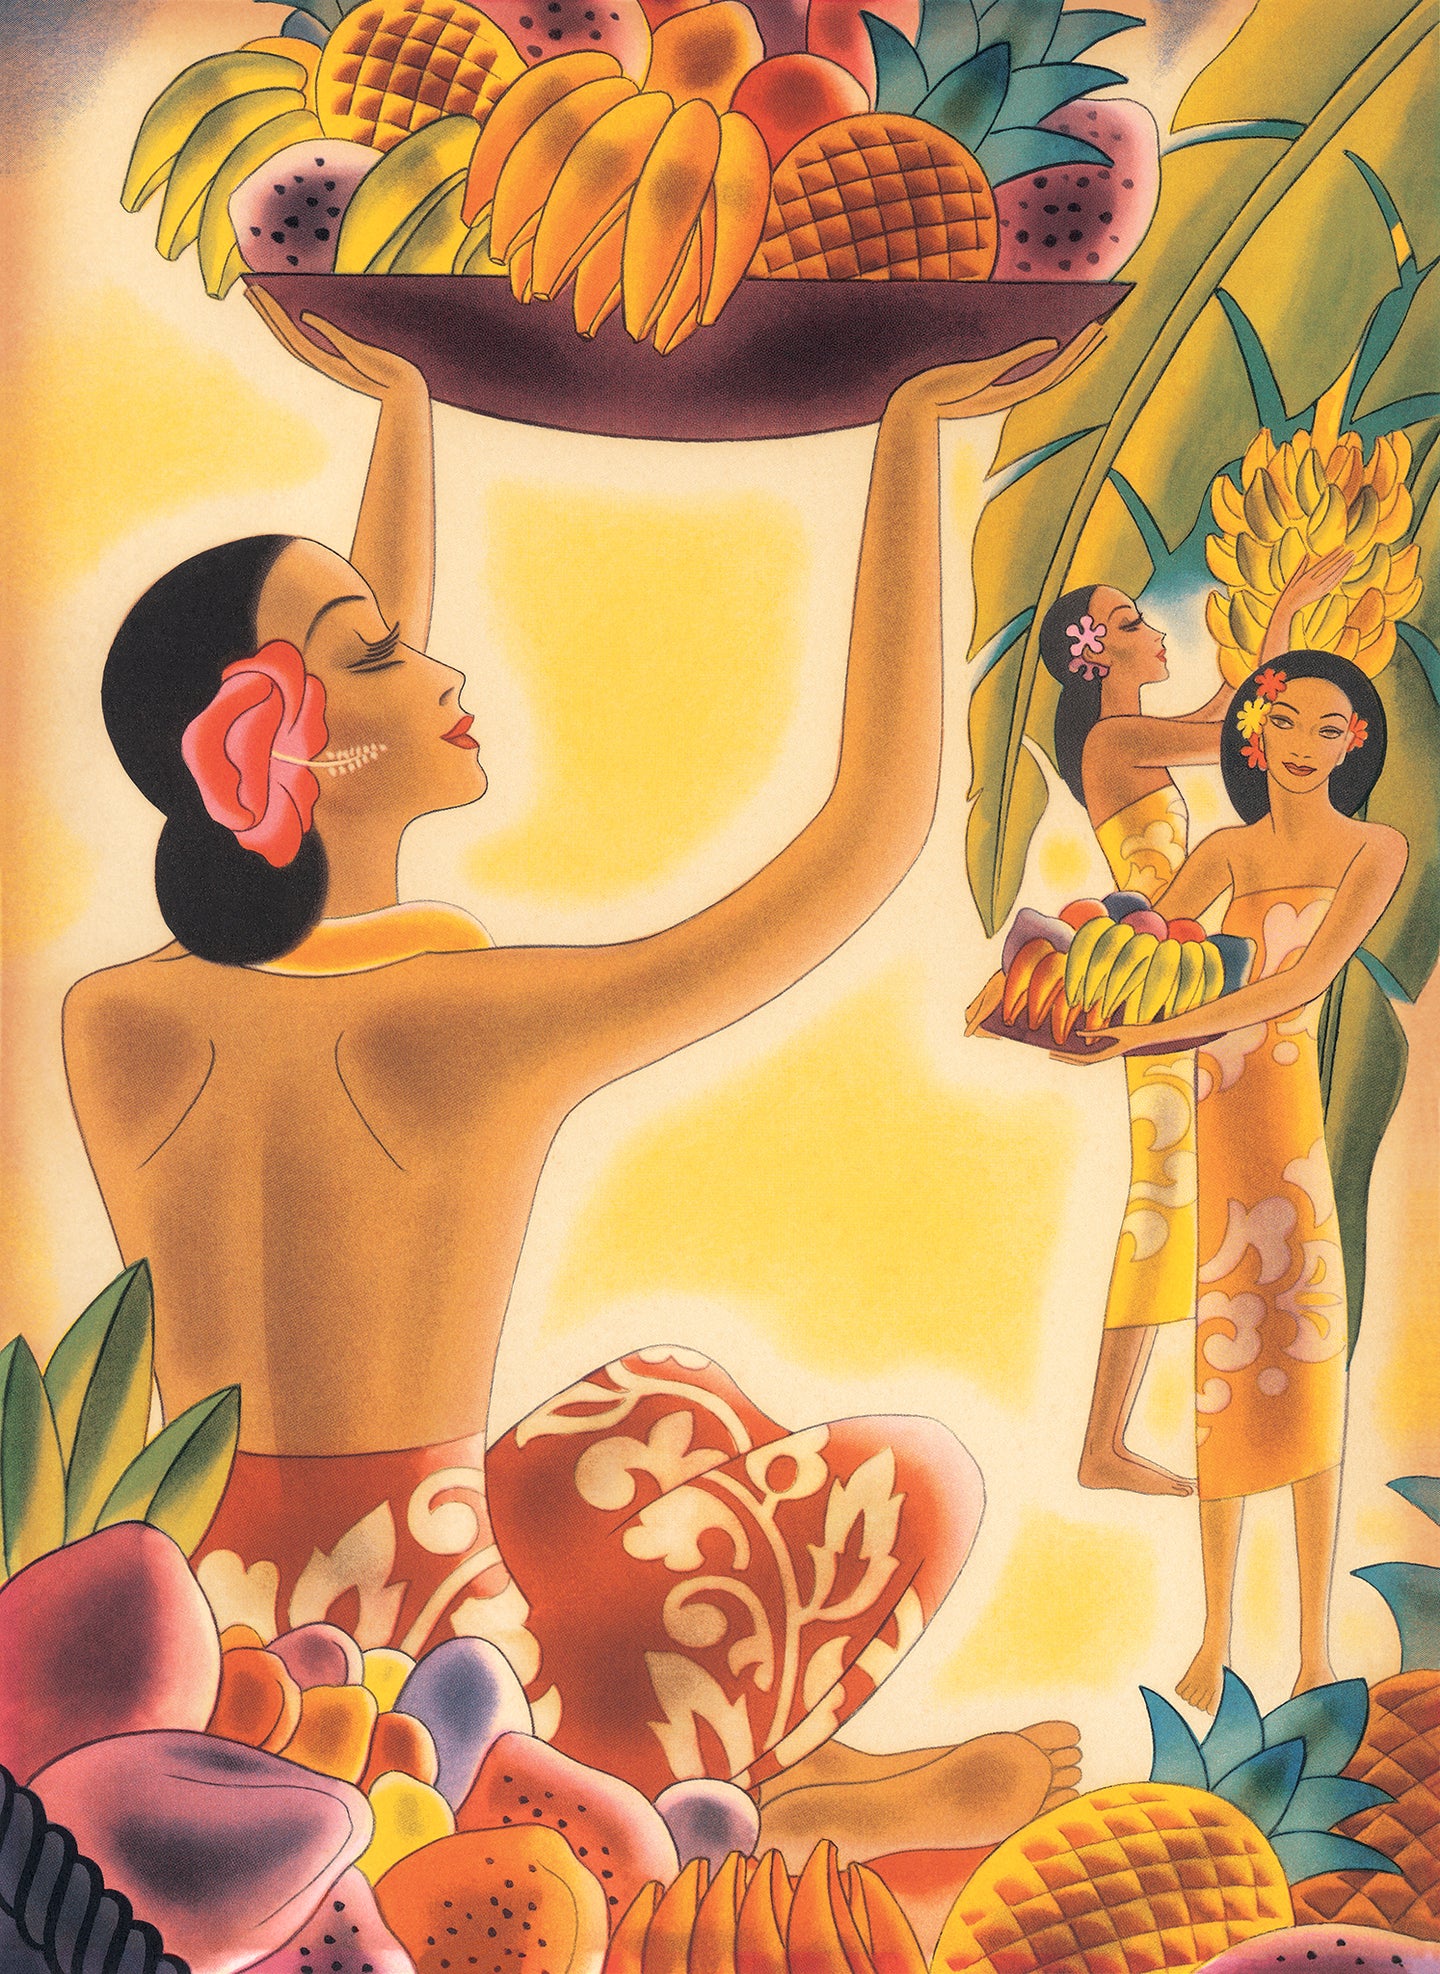 Colorful art by Frank McIntosh of island women wearing sarongs and gathering fruit from a tree and onto a platter. One woman in a red sarong is featured prominently holding a large bowl of fruit over her head.